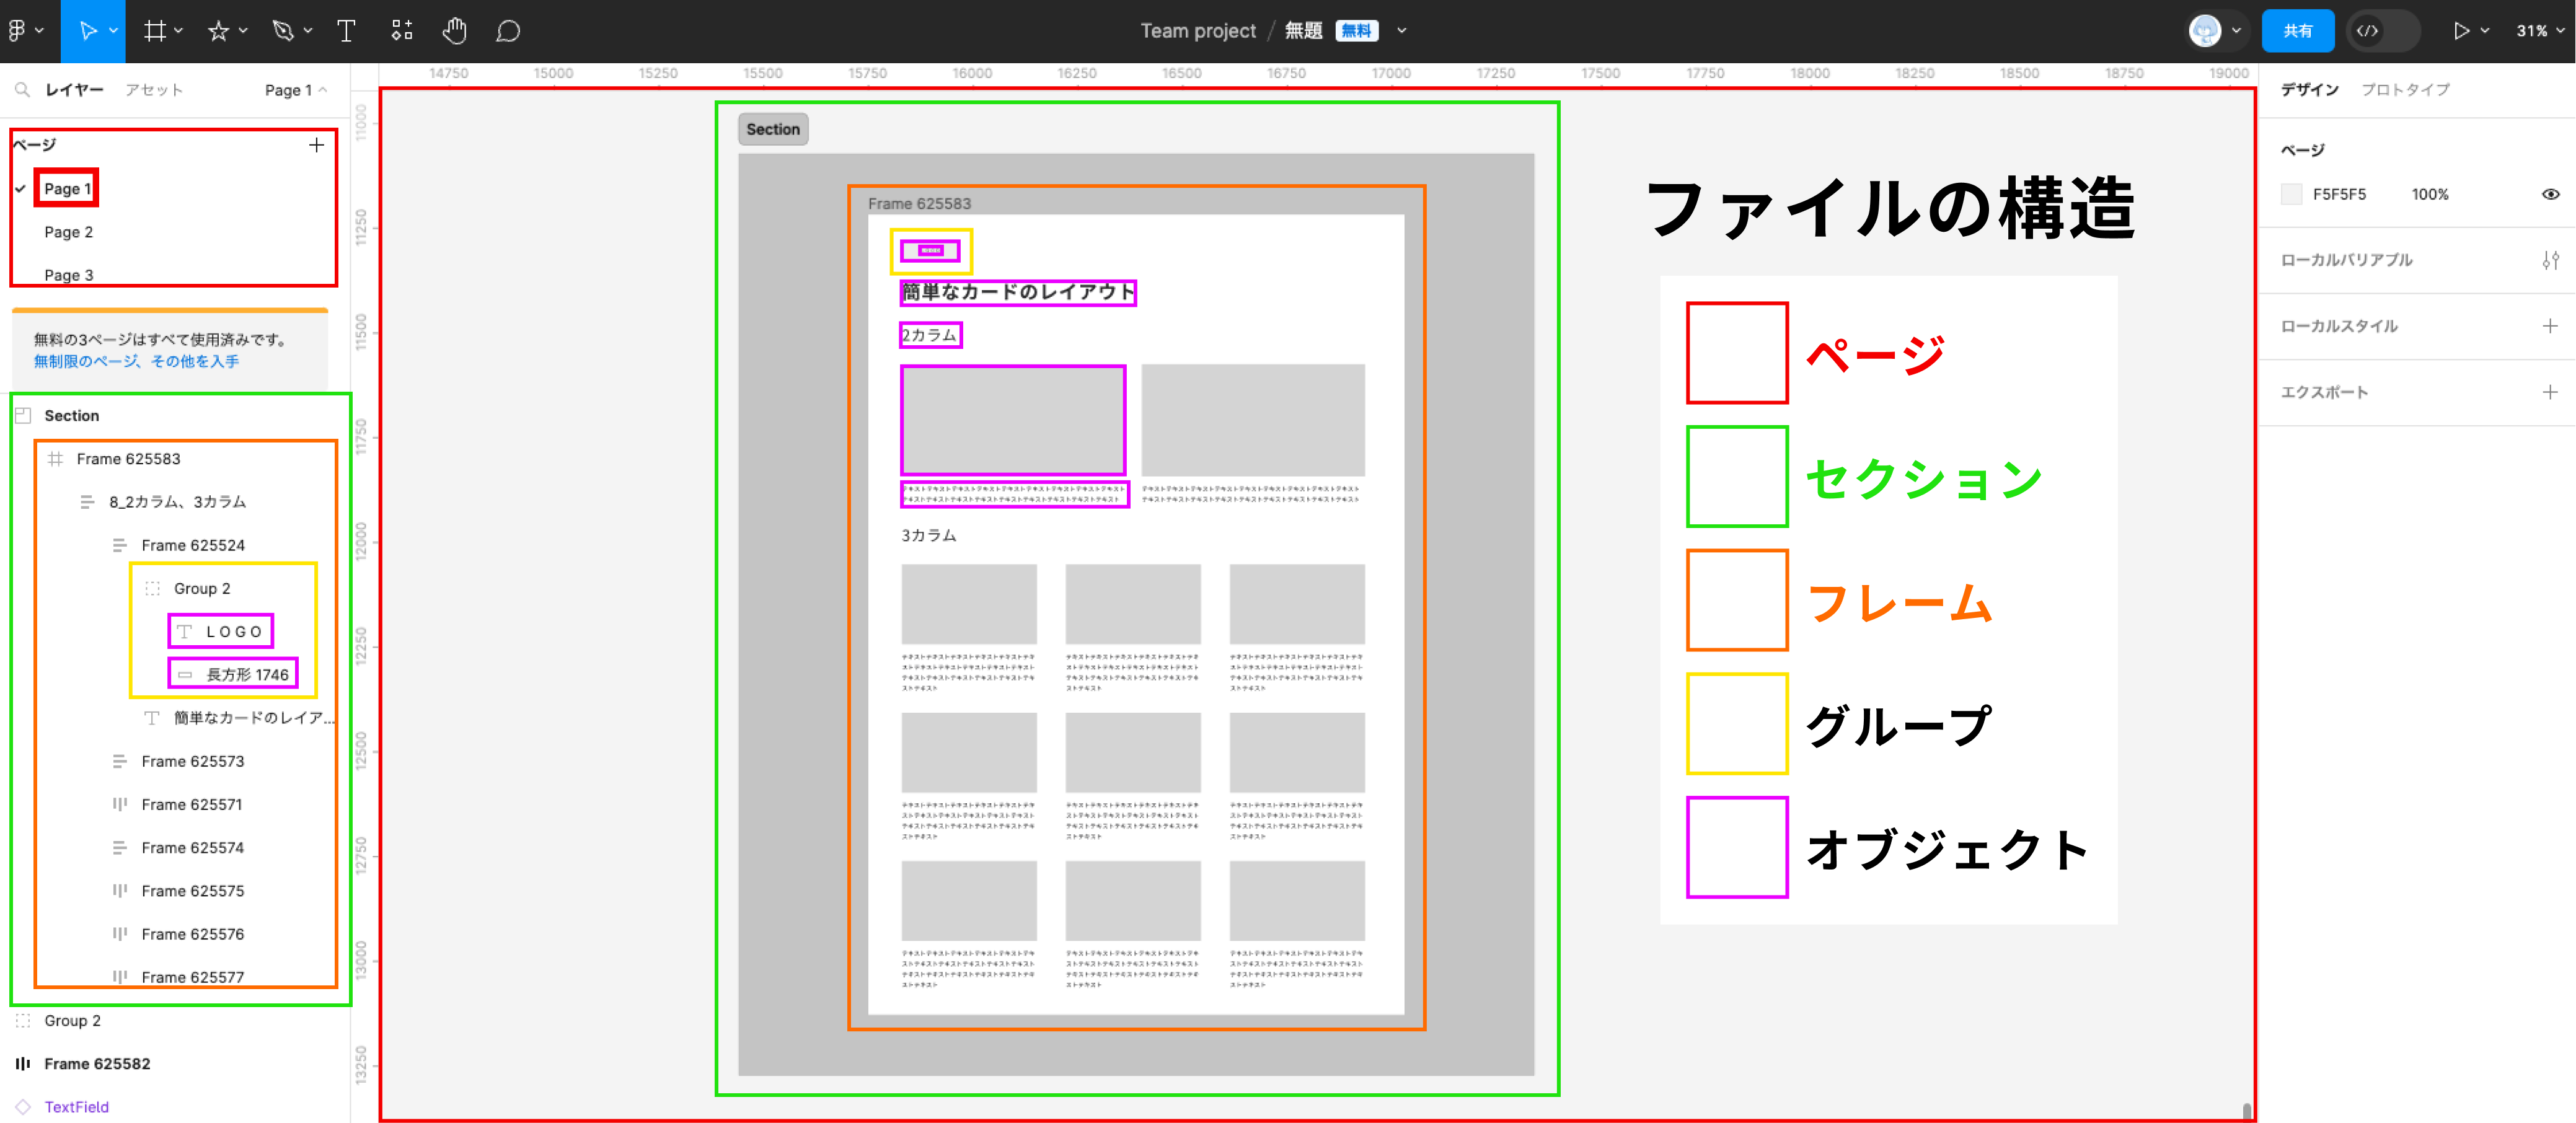 figma-basics-structure-5.png